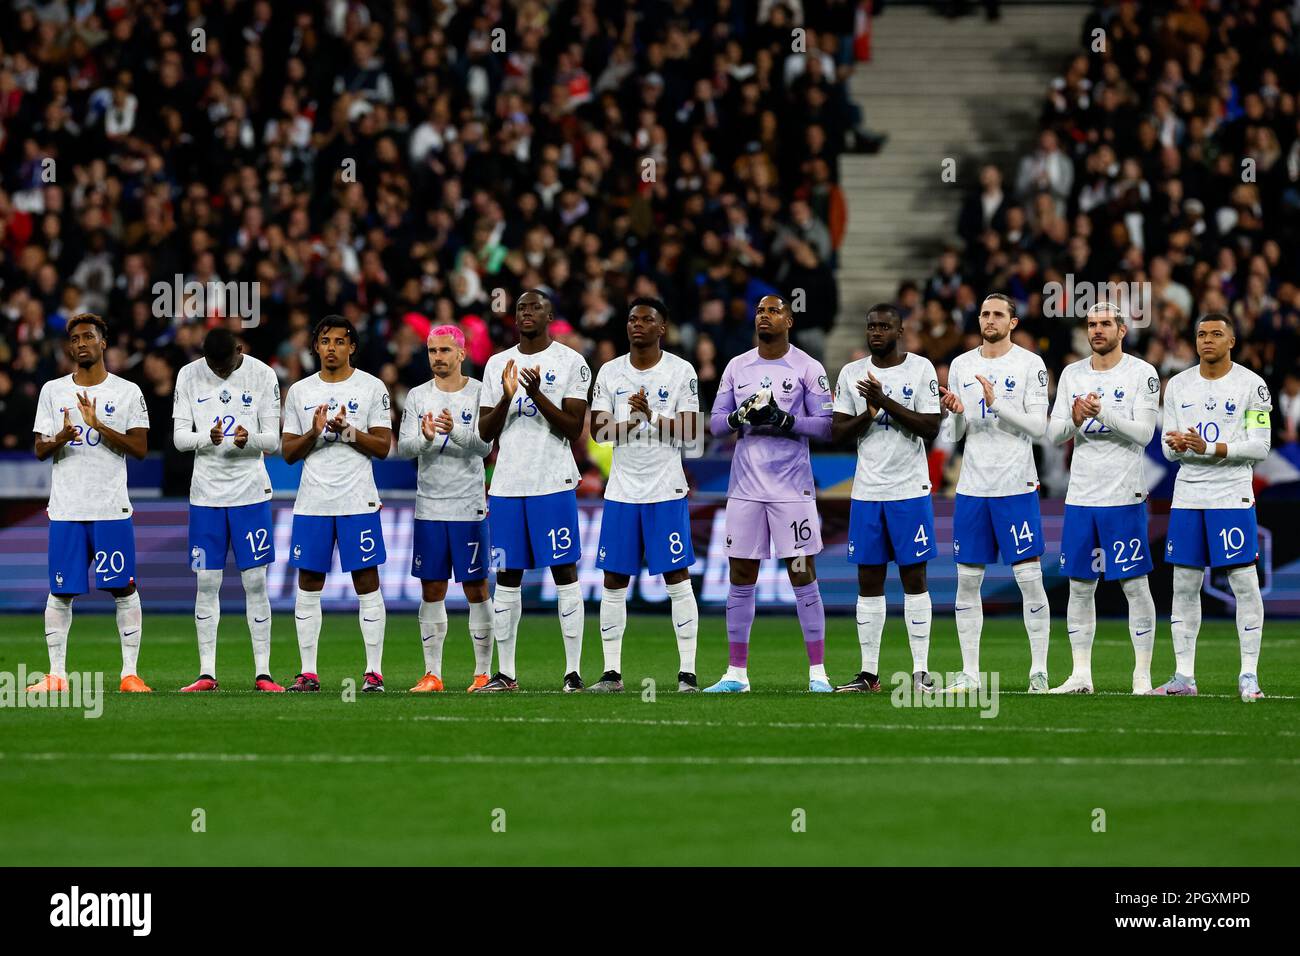 SAINT-DENIS, FRANCE - MARCH 24: Kingsley Coman of France, Randal Kolo Muani of France, Jules Kounde of France, Antoine Griezmann of France, Ibrahima Konate of France, Aurelien Tchouameni of France, Mike Maignan of France, Dayot Upamecano of France, Adrien Rabiot of France, Theo Hernandez of France and Kylian Mbappe of France line up for a moment of silence prior to the UEFA EURO 2024 Qualifying Round Group B match between France and Netherlands at Stade de France on March 24, 2023 in Saint-Denis, France (Photo by Marcel ter Bals/Orange Pictures) Stock Photo